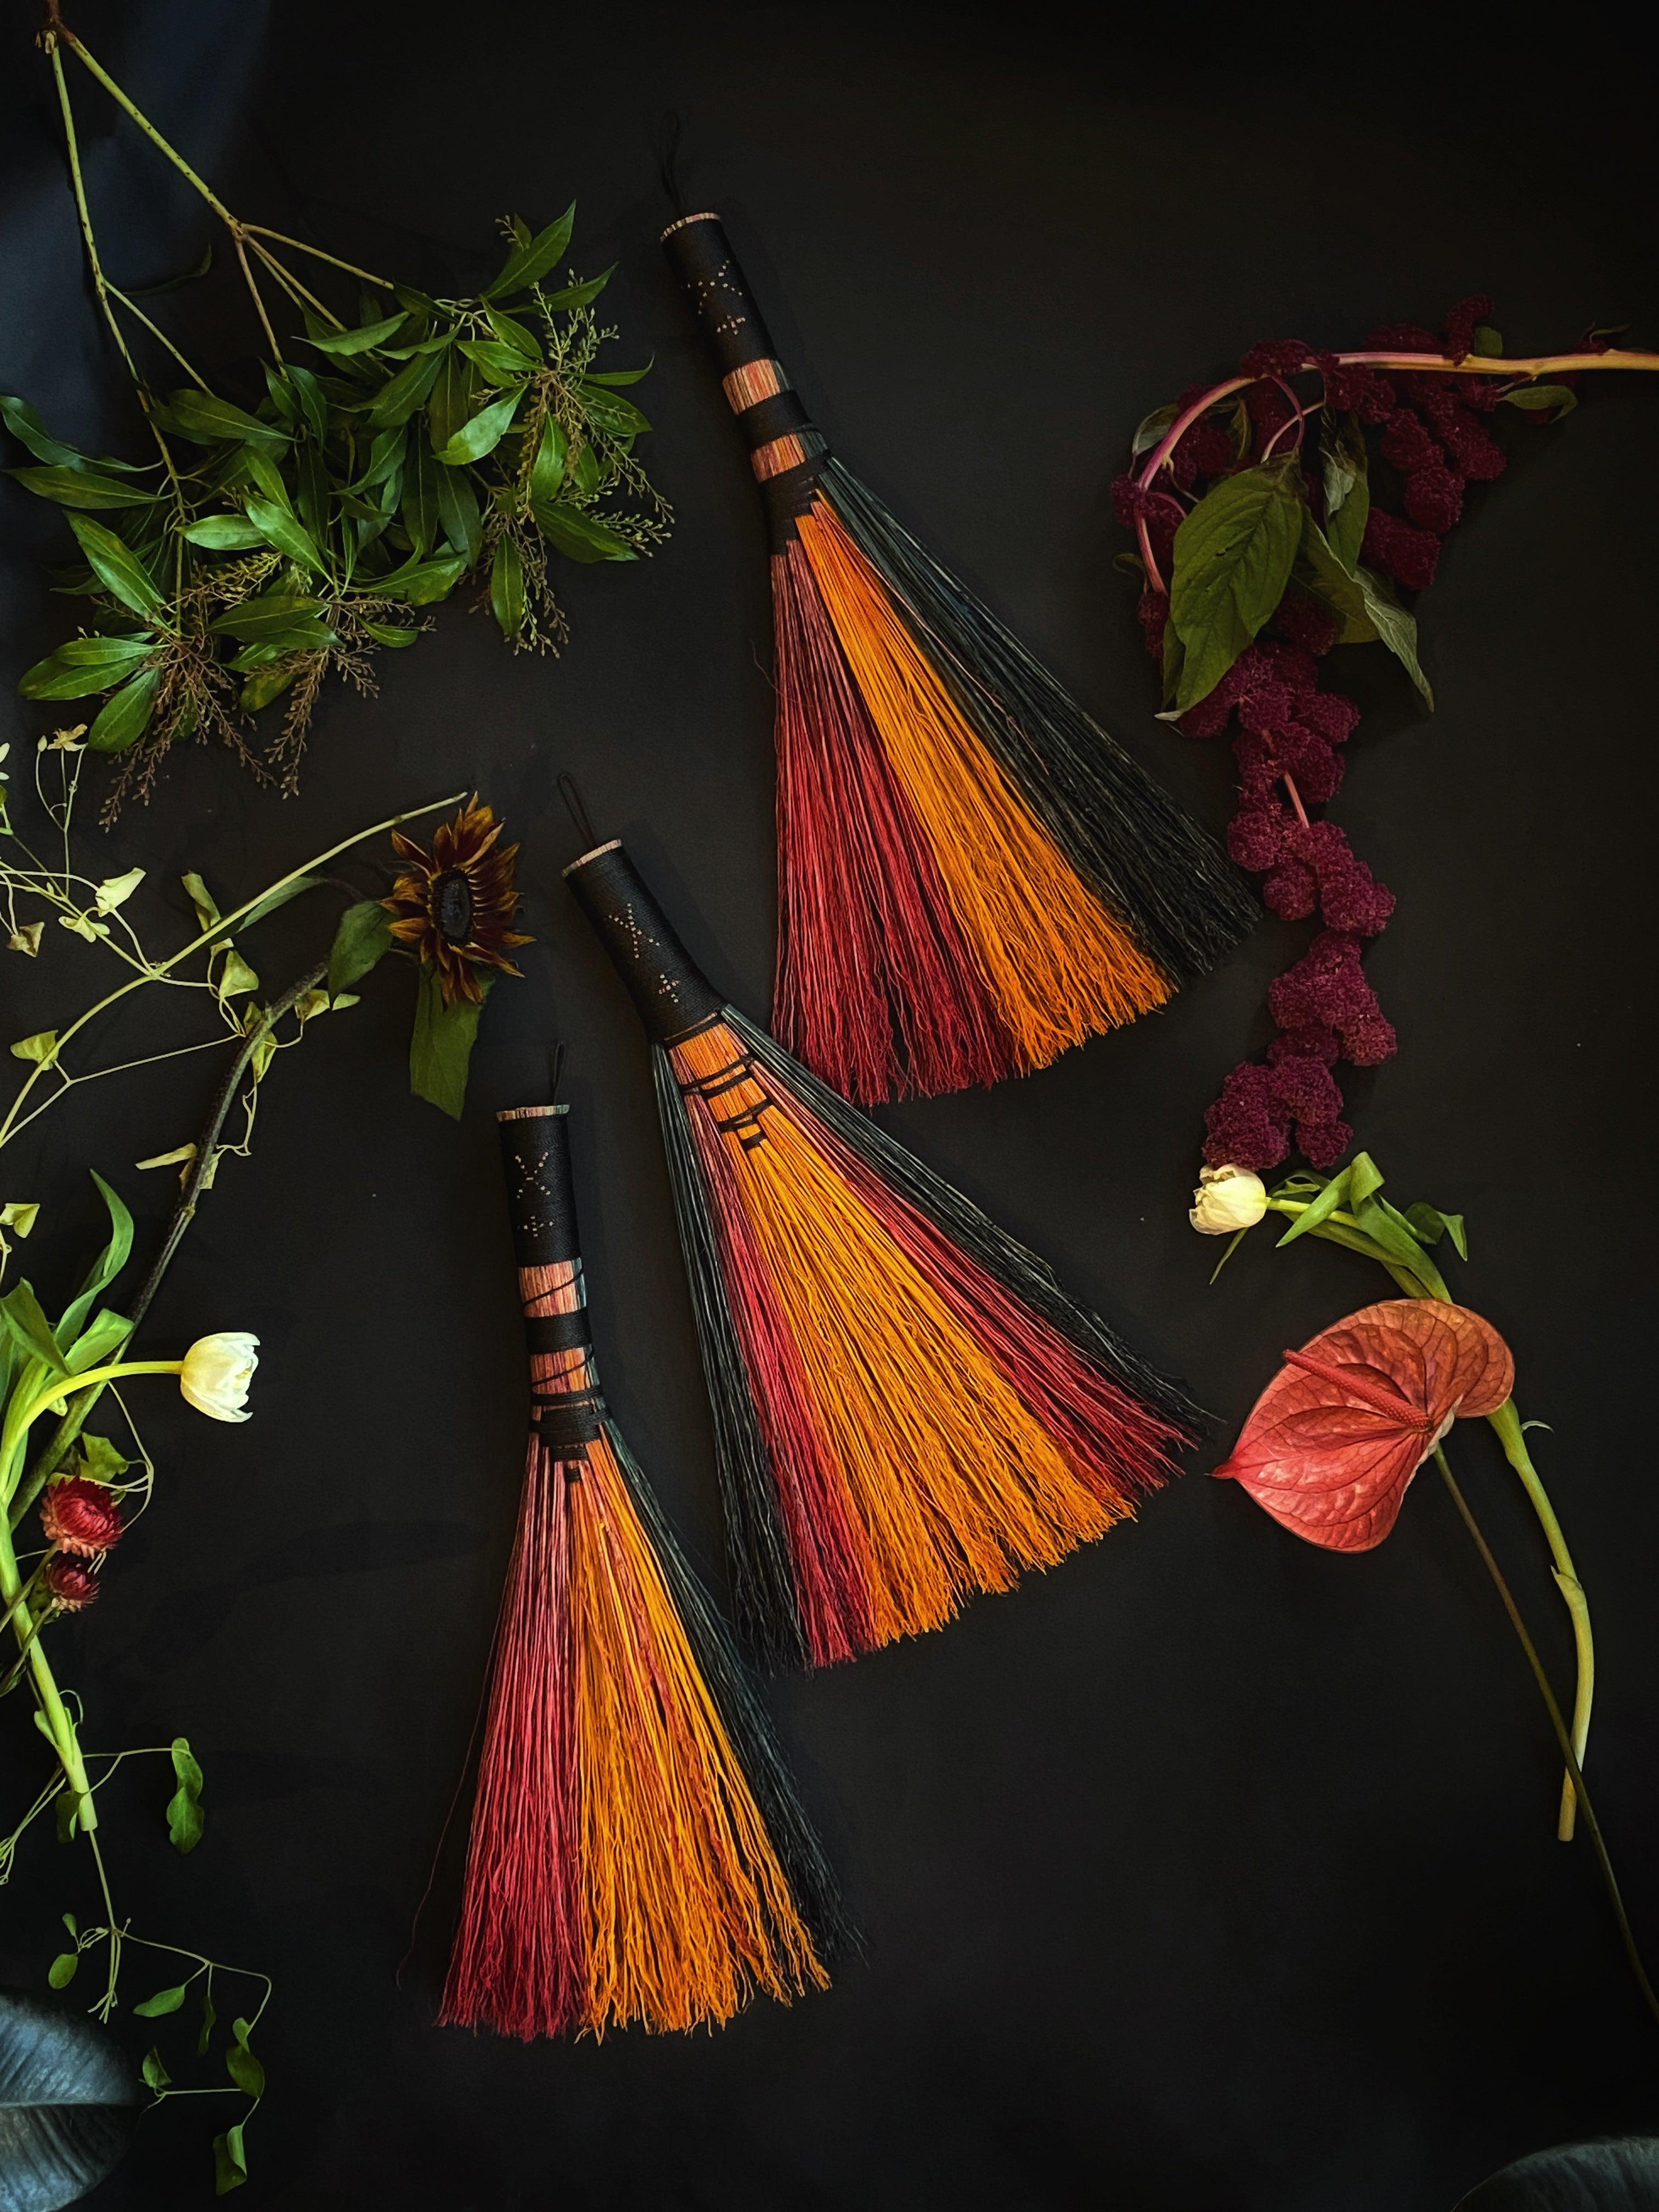 Hand Wisks and Specialty Hand Brooms - Keven Craft Rituals